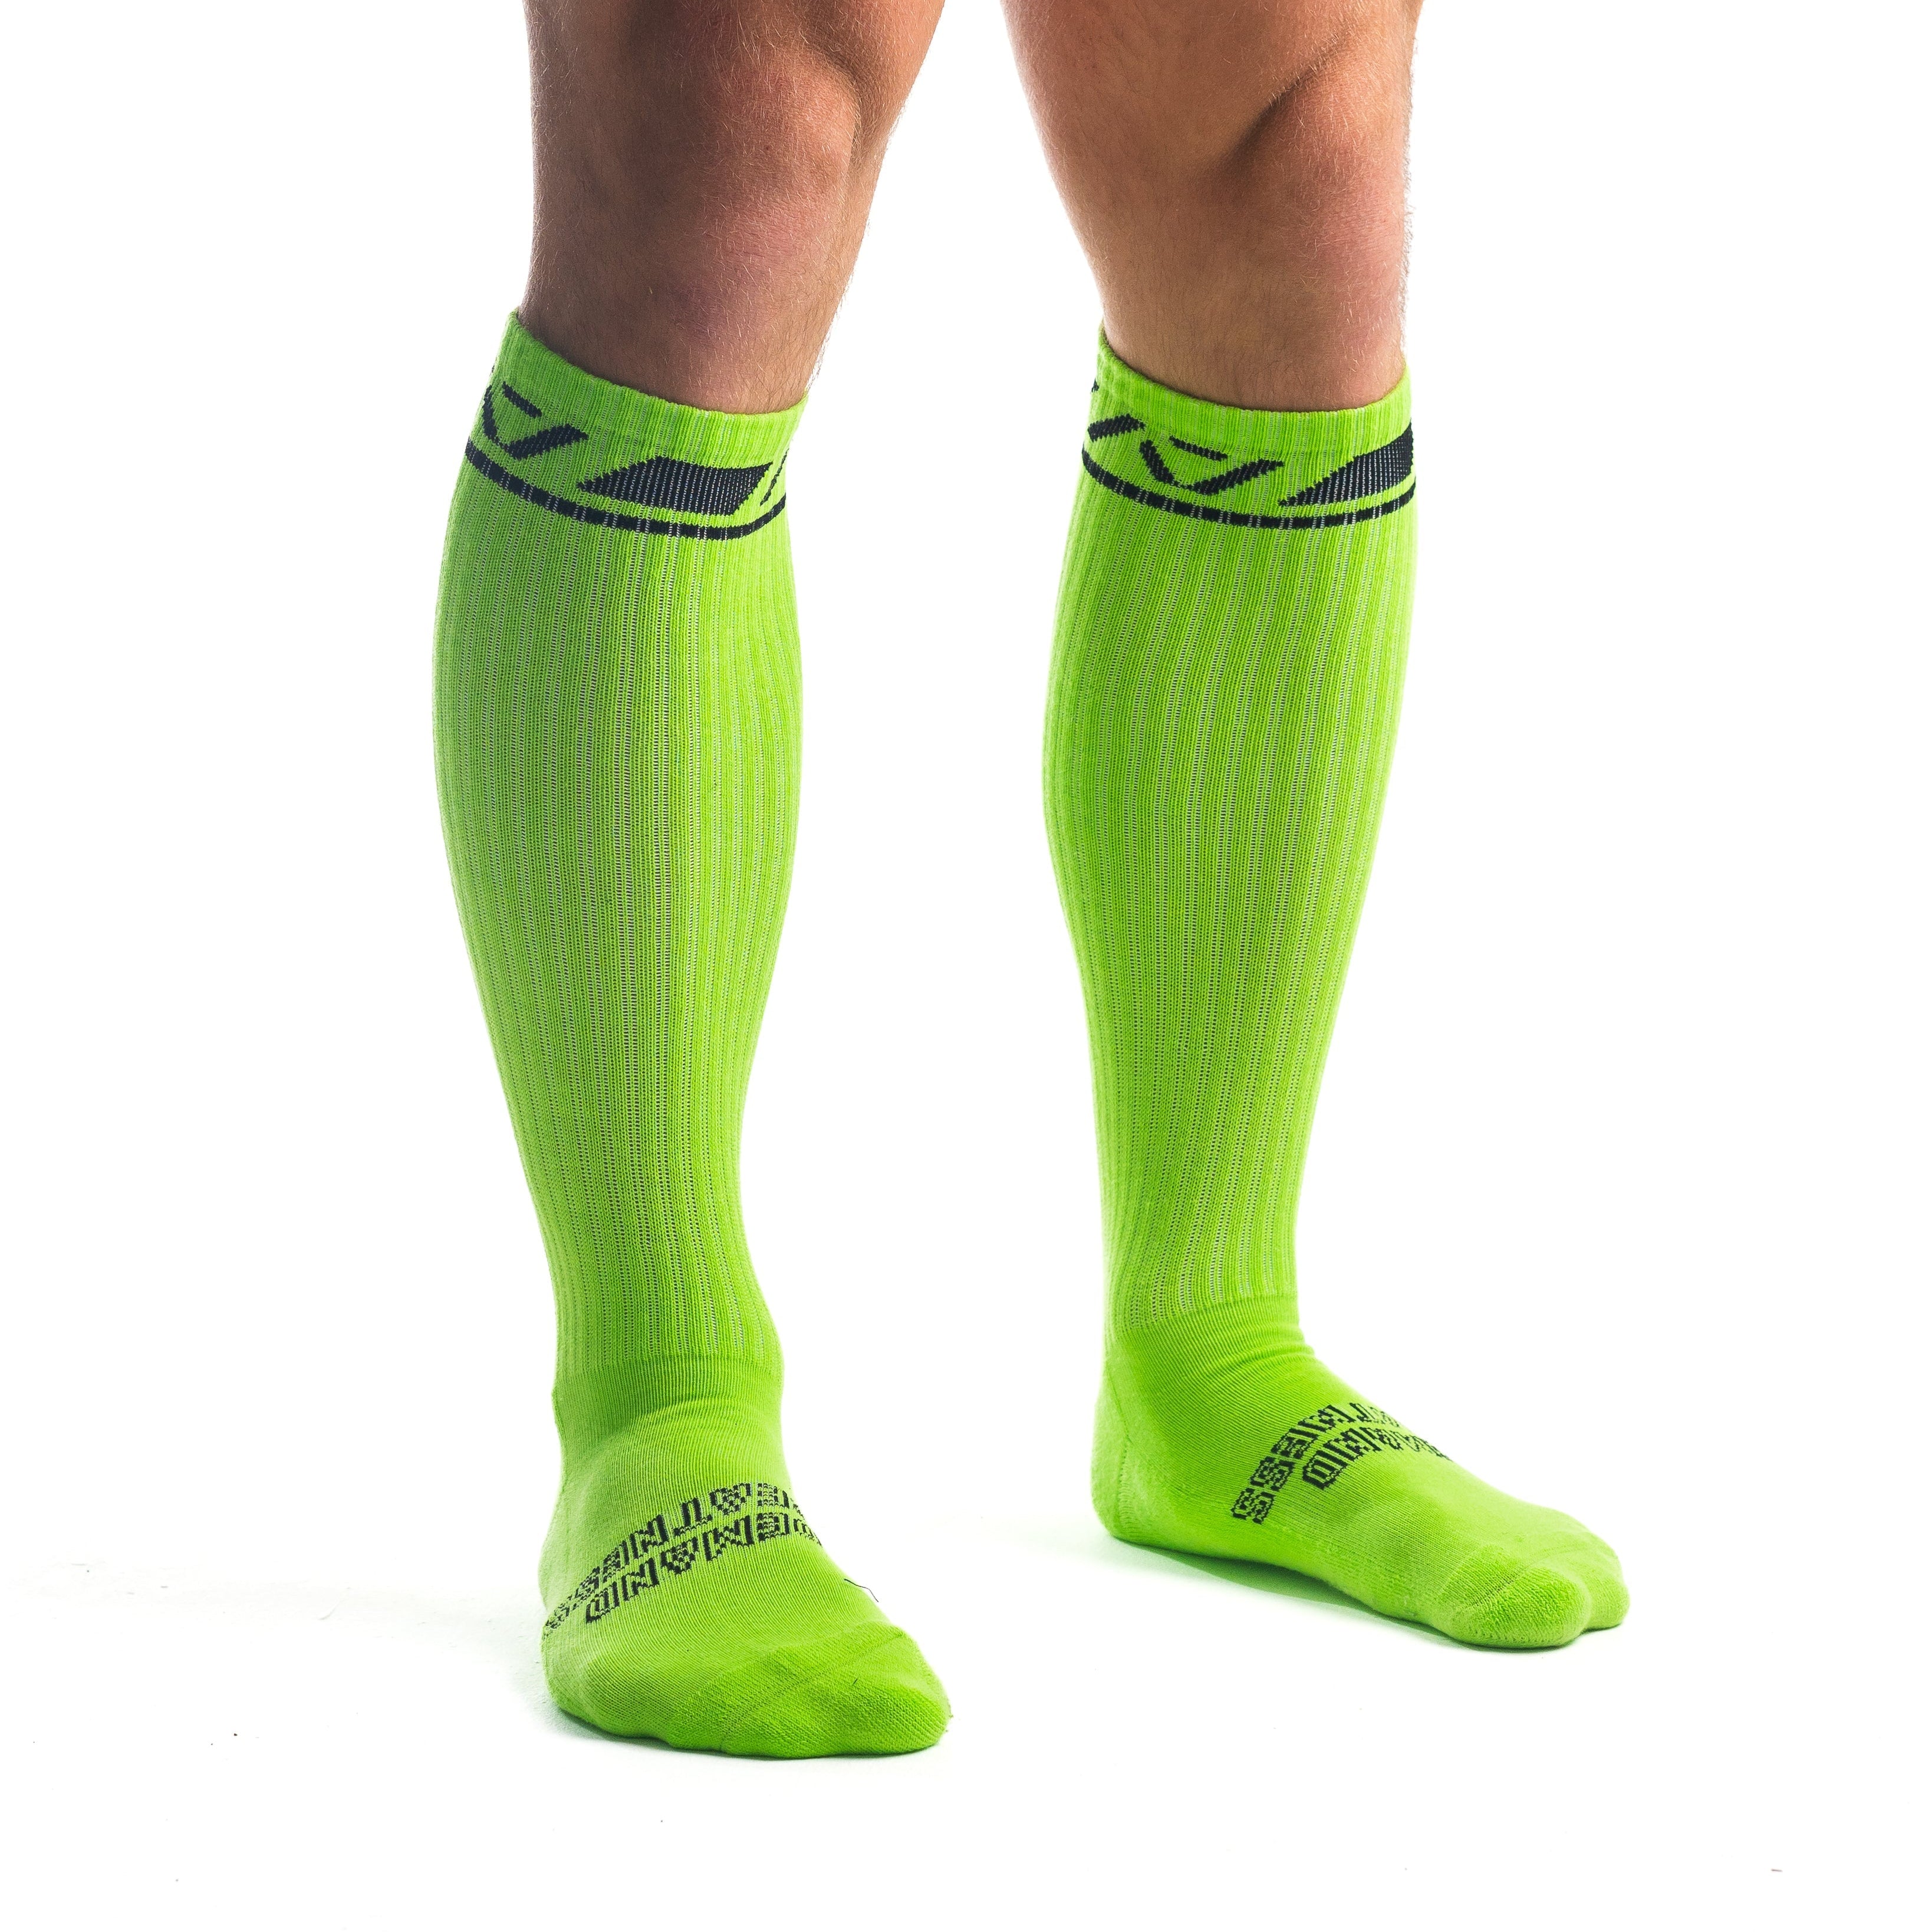 A7 Alien Deadlift socks are designed specifically for pulls and keep your shins protected from scrapes. A7 deadlift socks are a perfect pair to wear in training or powerlifting competition. The IPF Approved Kit includes Powerlifting Singlet, A7 Meet Shirt, A7 Zebra Wrist Wraps, A7 Deadlift Socks, Hourglass Knee Sleeves (Stiff Knee Sleeves and Rigor Mortis Knee Sleeves). Genouillères powerlifting shipping to France, Spain, Ireland, Germany, Italy, Sweden and EU.